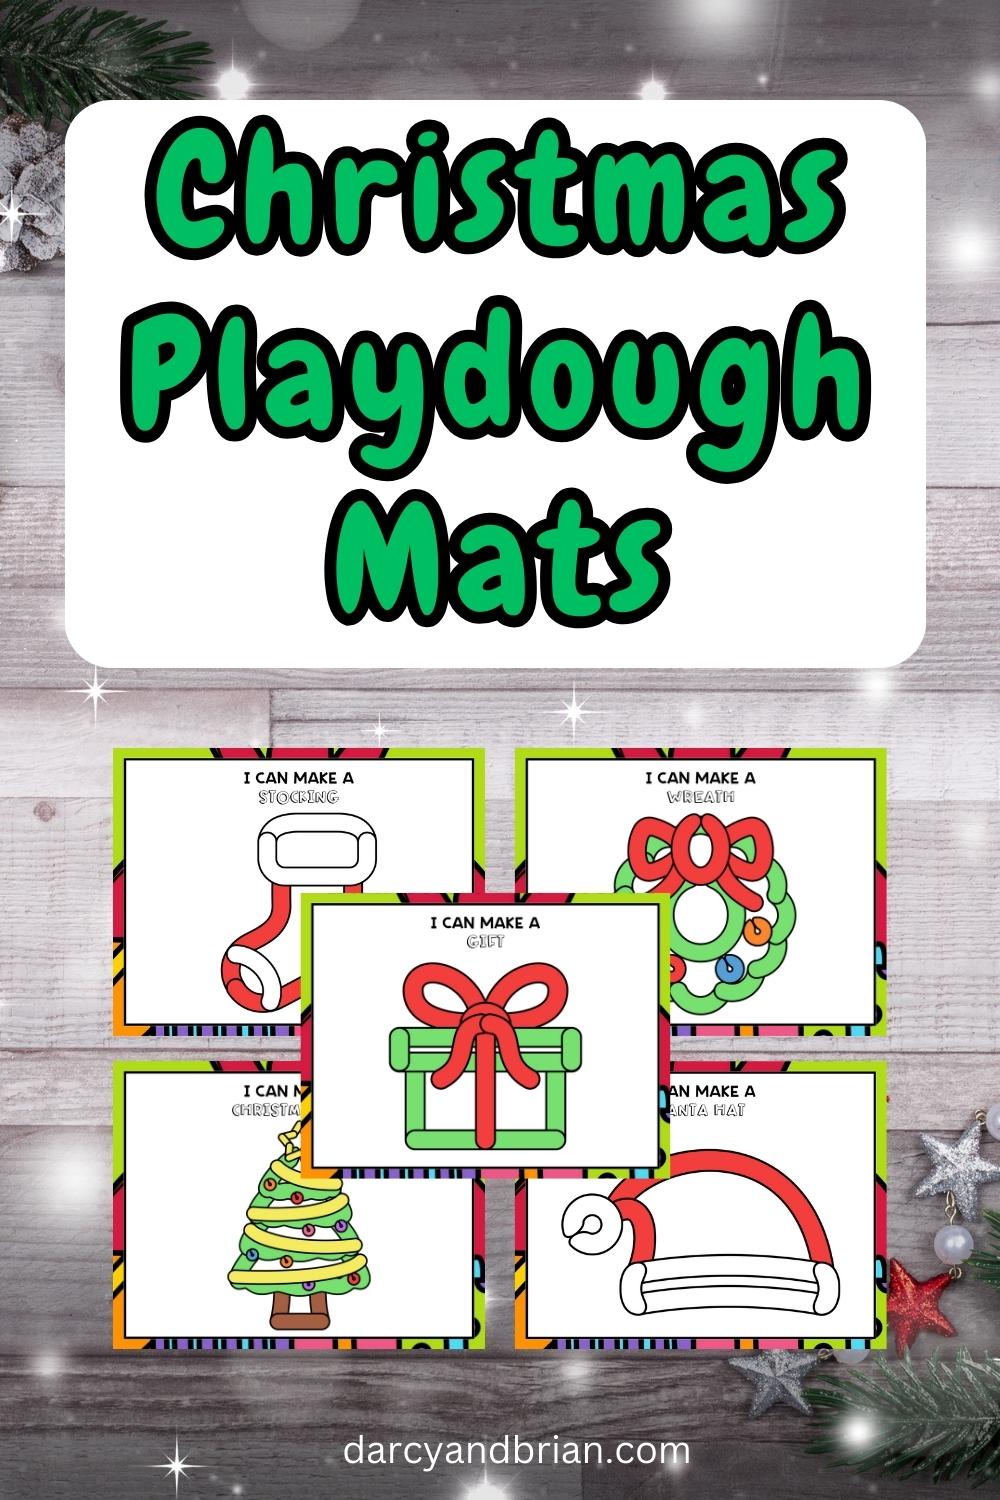 FREE Printable Playdoh Mats, Recipes, & Activities for Kids